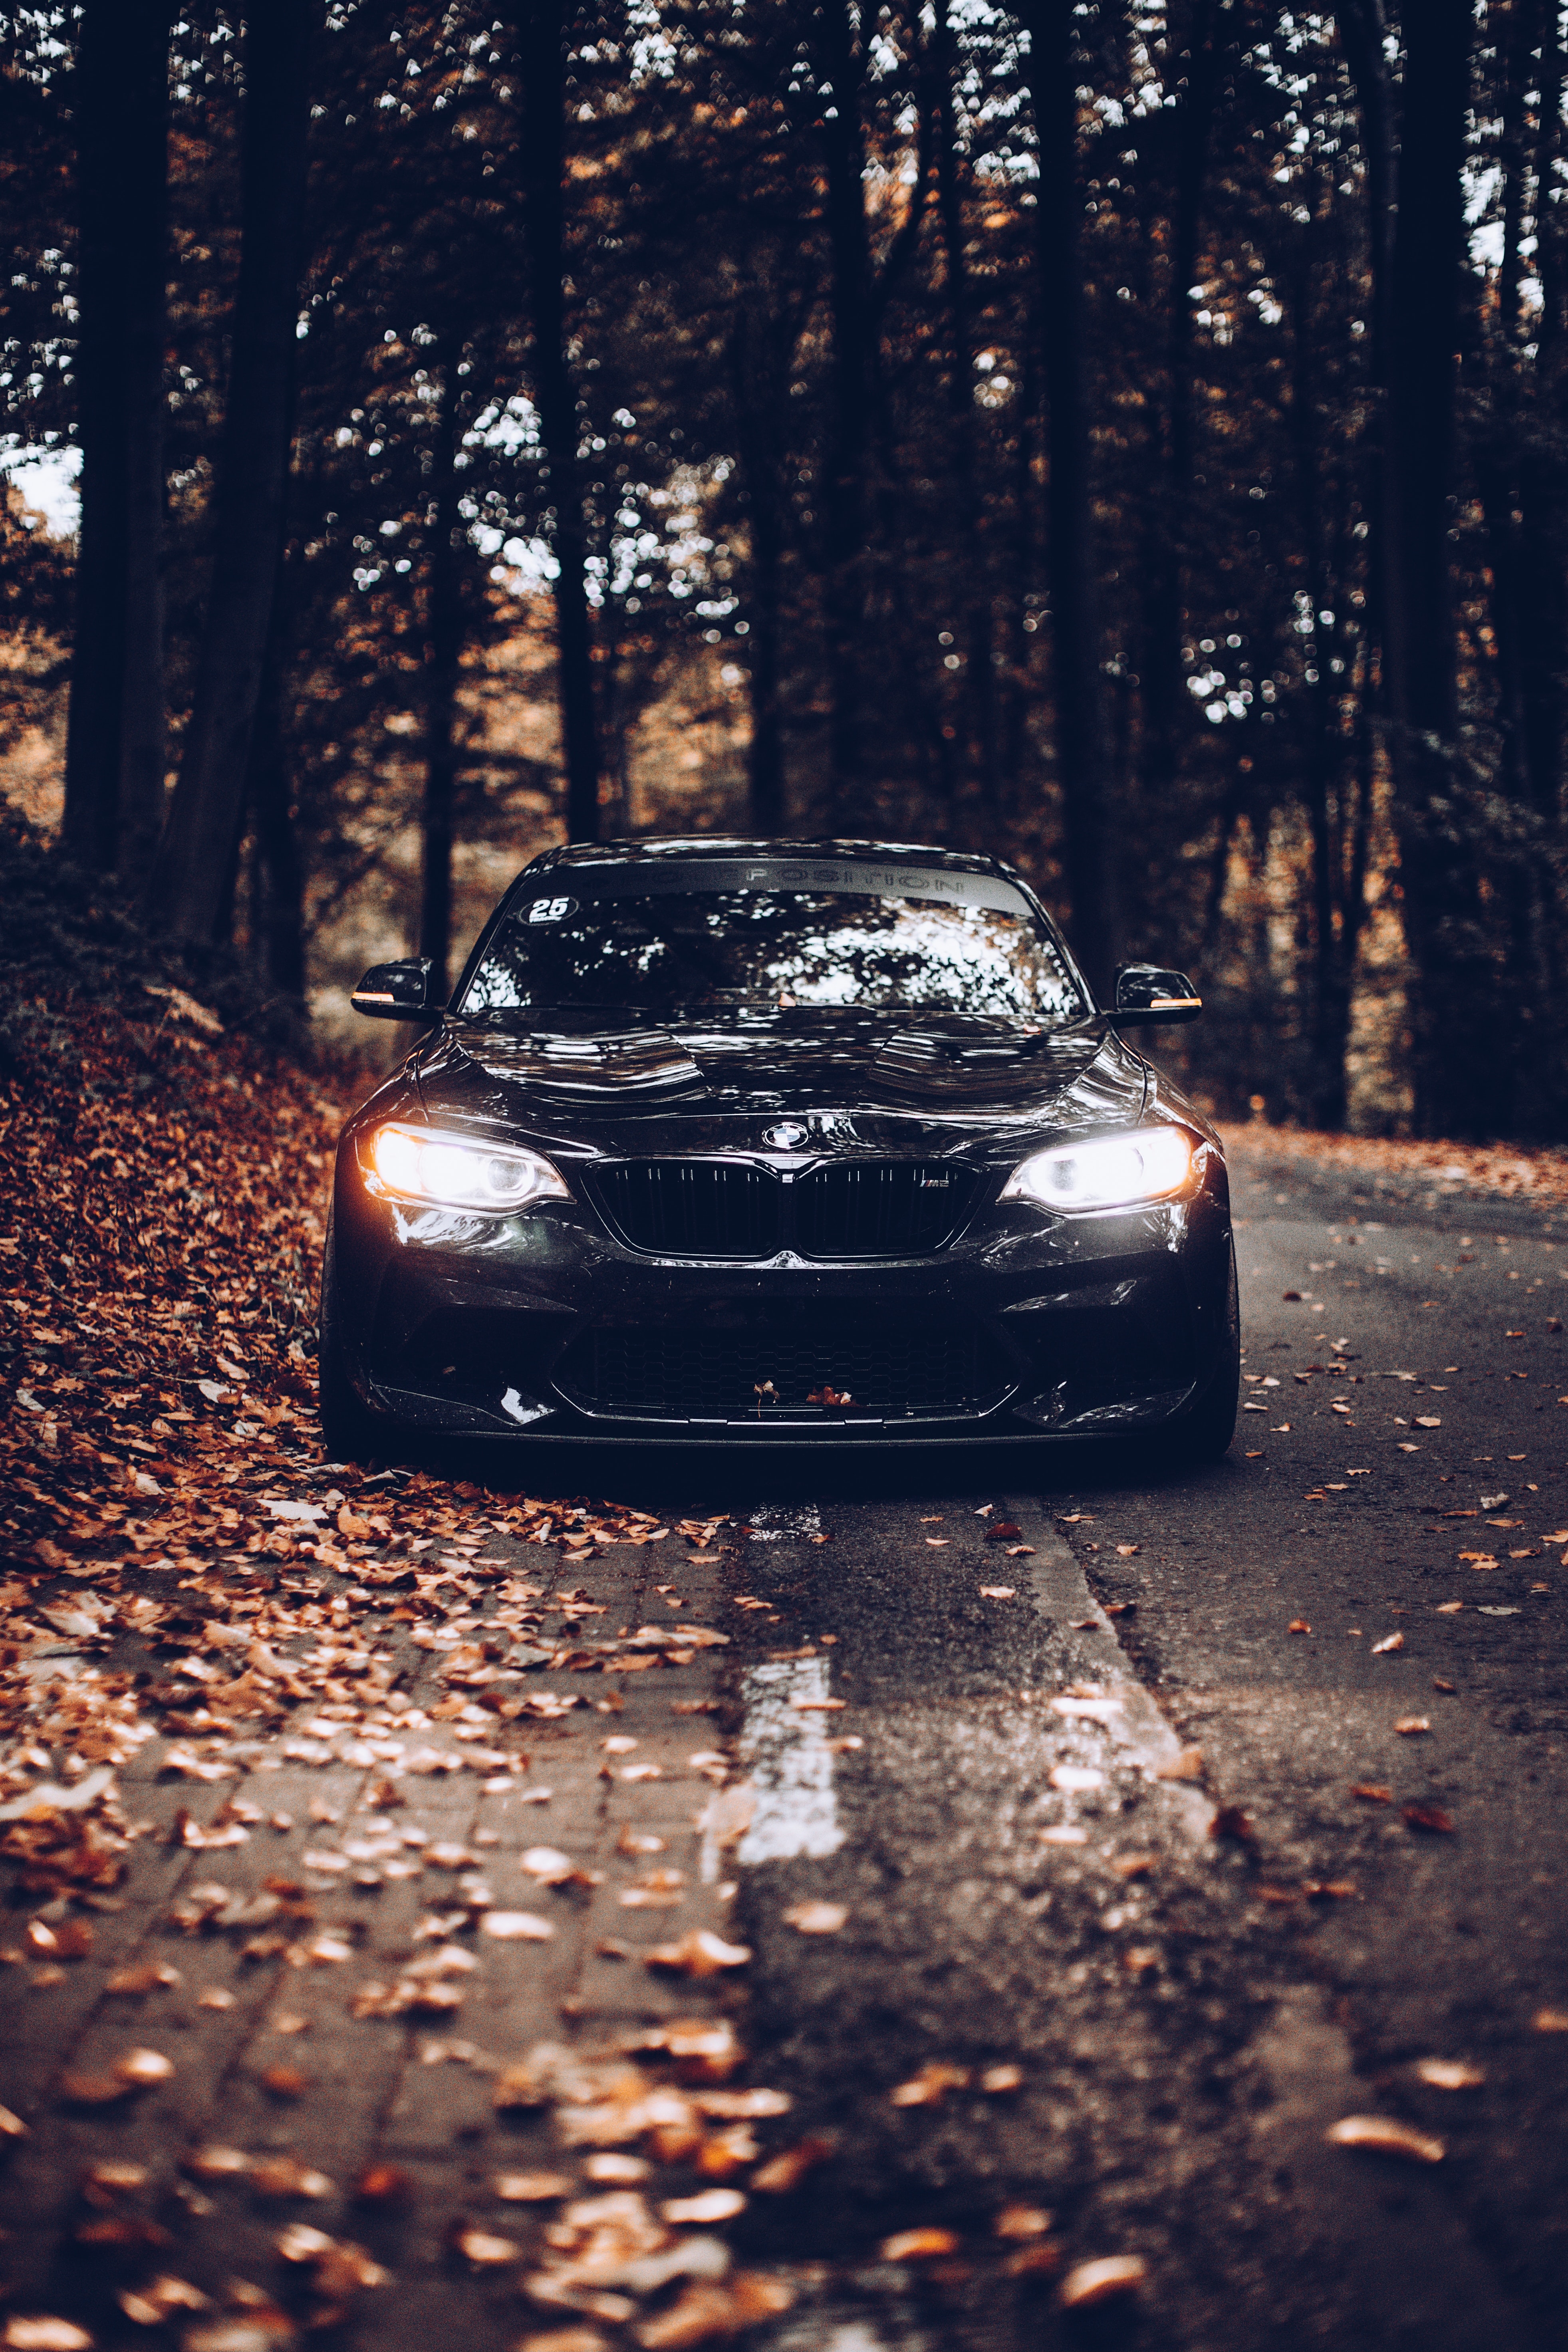 112429 download wallpaper autumn, bmw, cars, black, car, front view screensavers and pictures for free